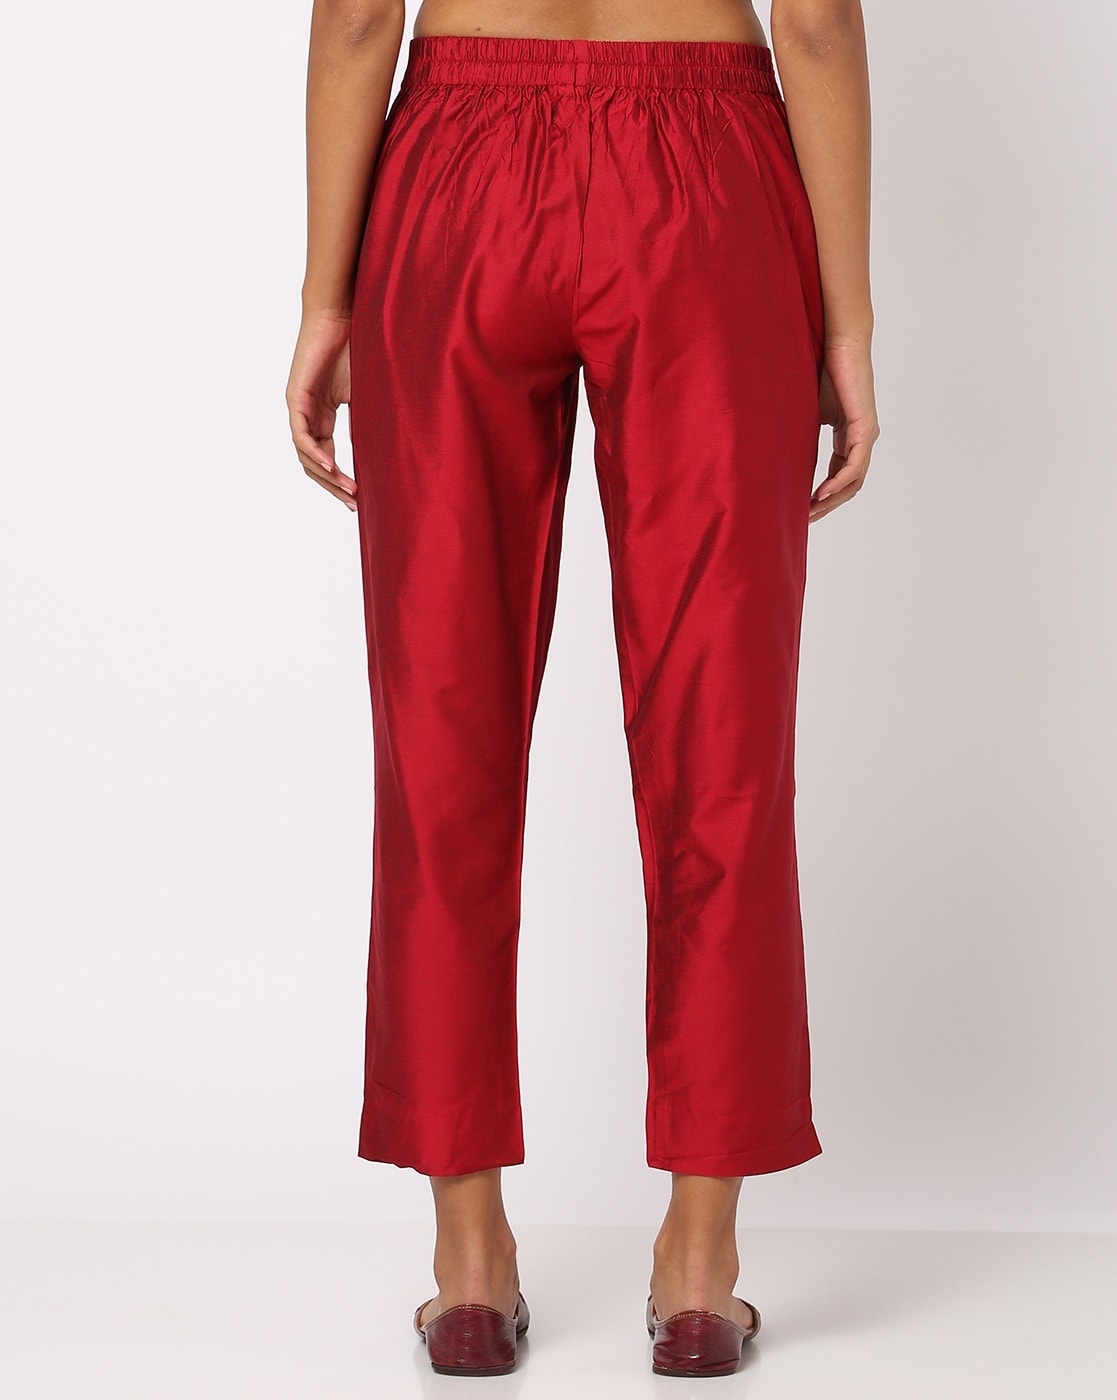 knix, Pants & Jumpsuits, Nwt Knix Your Moves Leggings Merlot Red Sz S